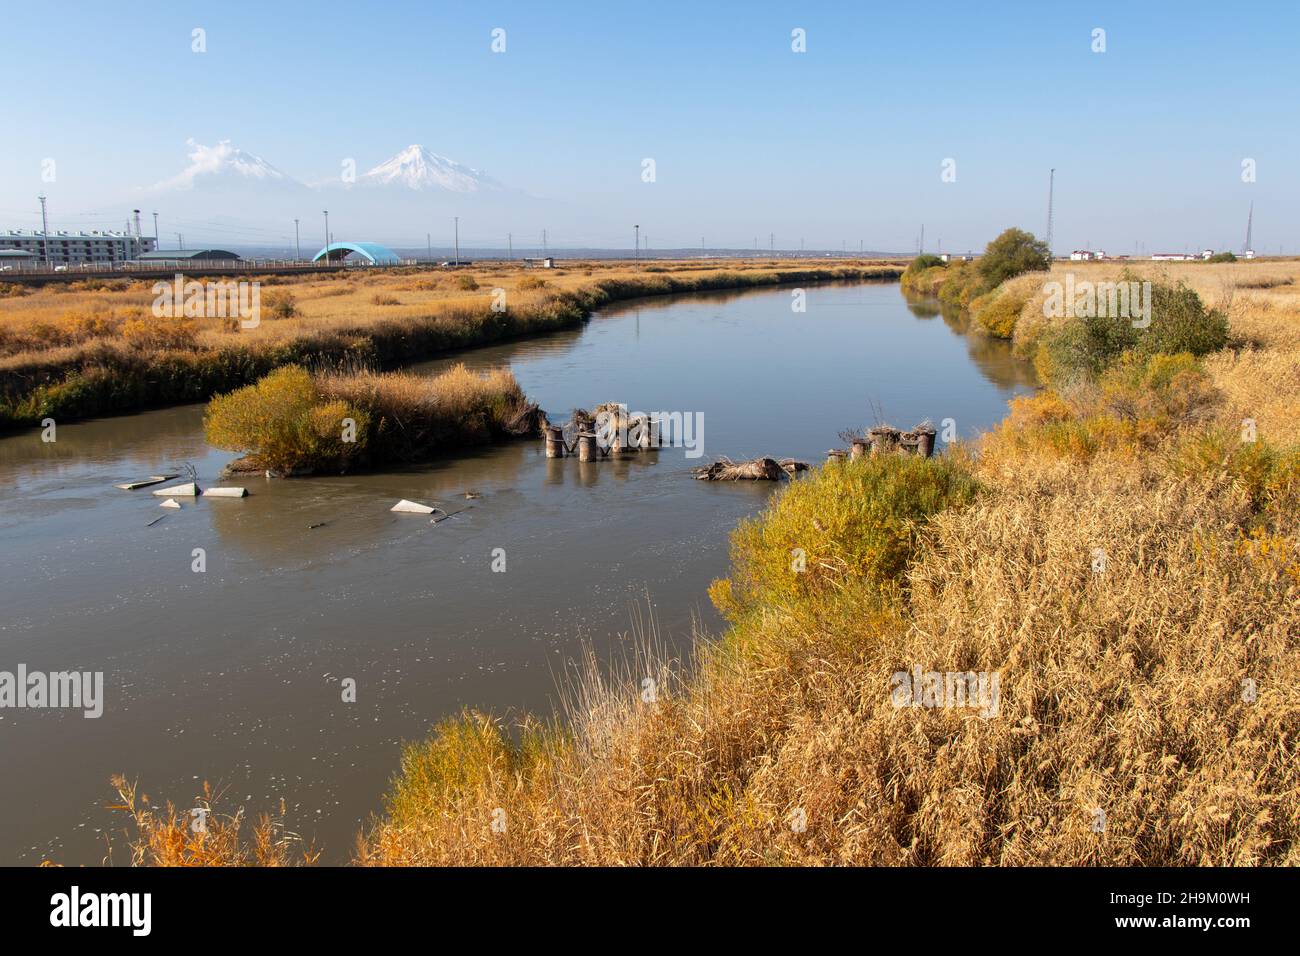 Aras river between Nakhchivan and Turkey. The famous river of Aras Stock Photo